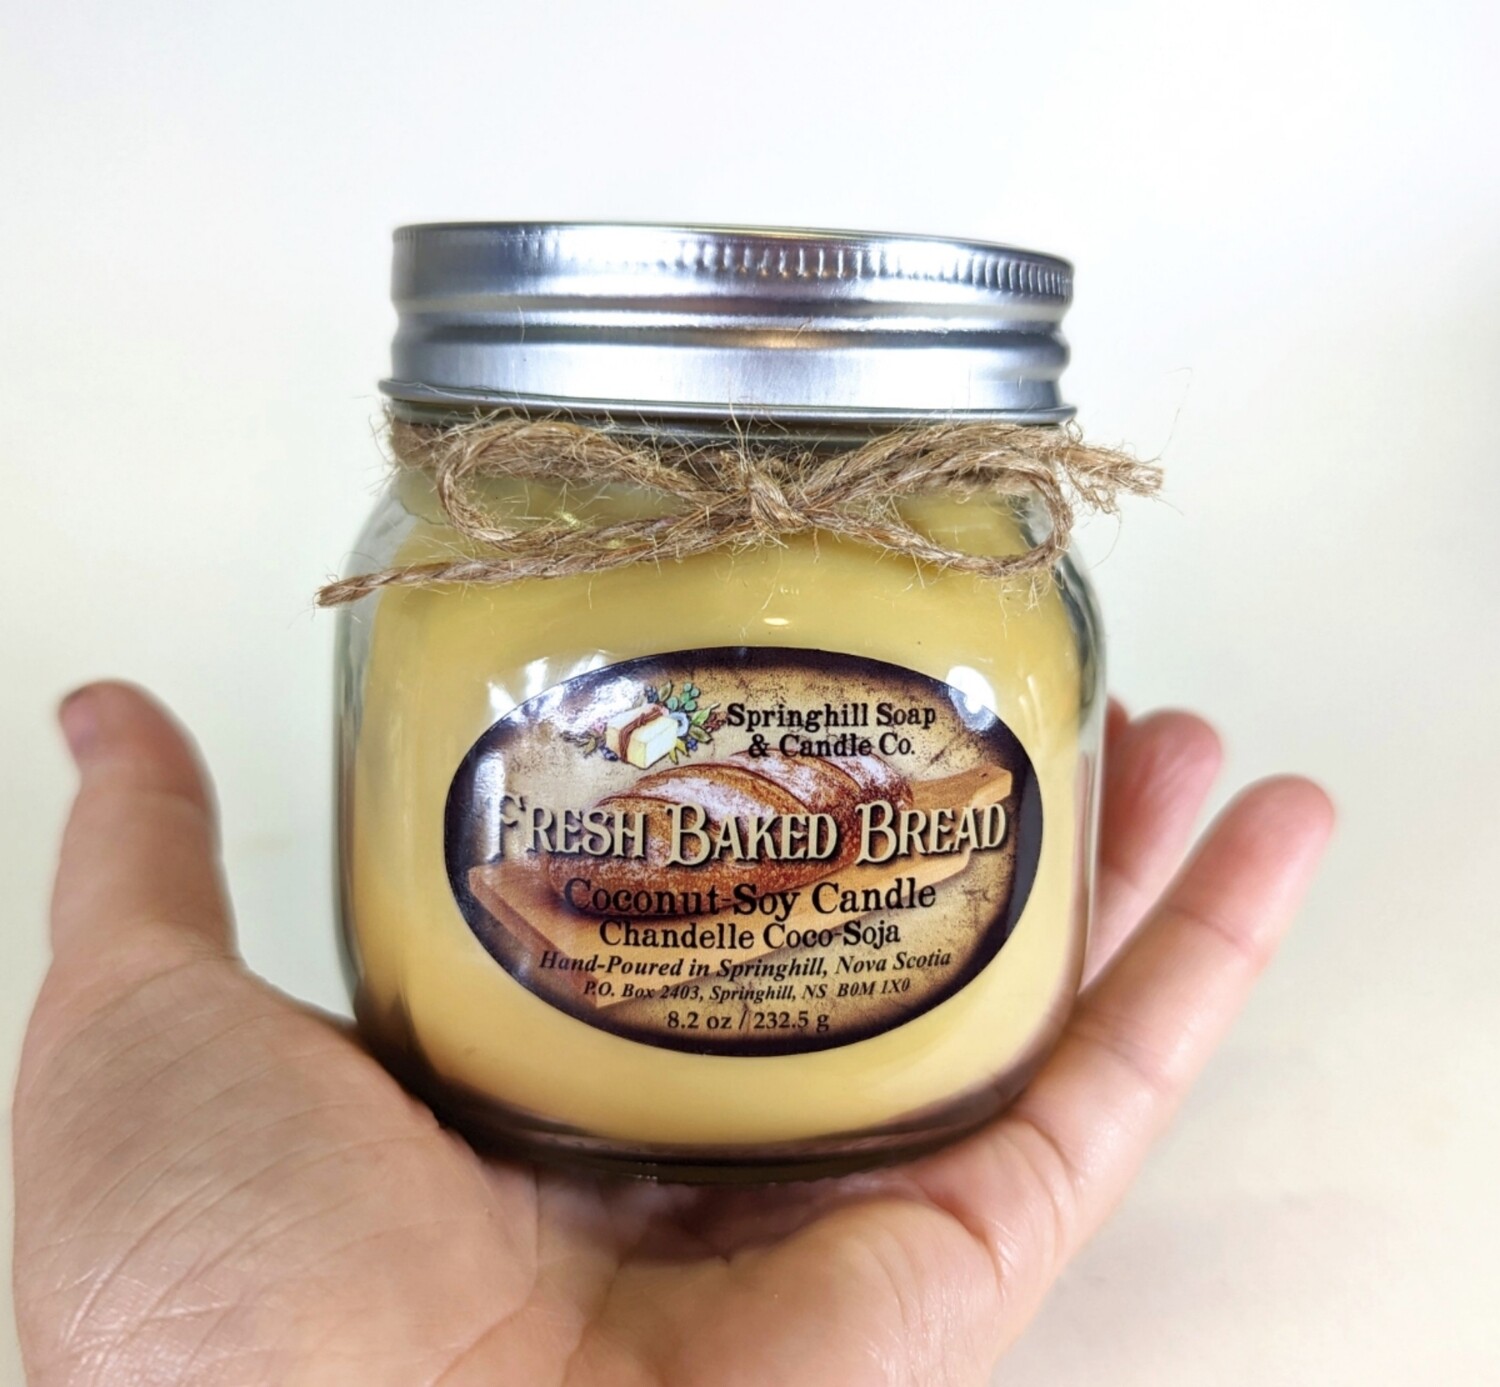 Fresh Baked Bread 8.2oz Coconut-Soy Candle